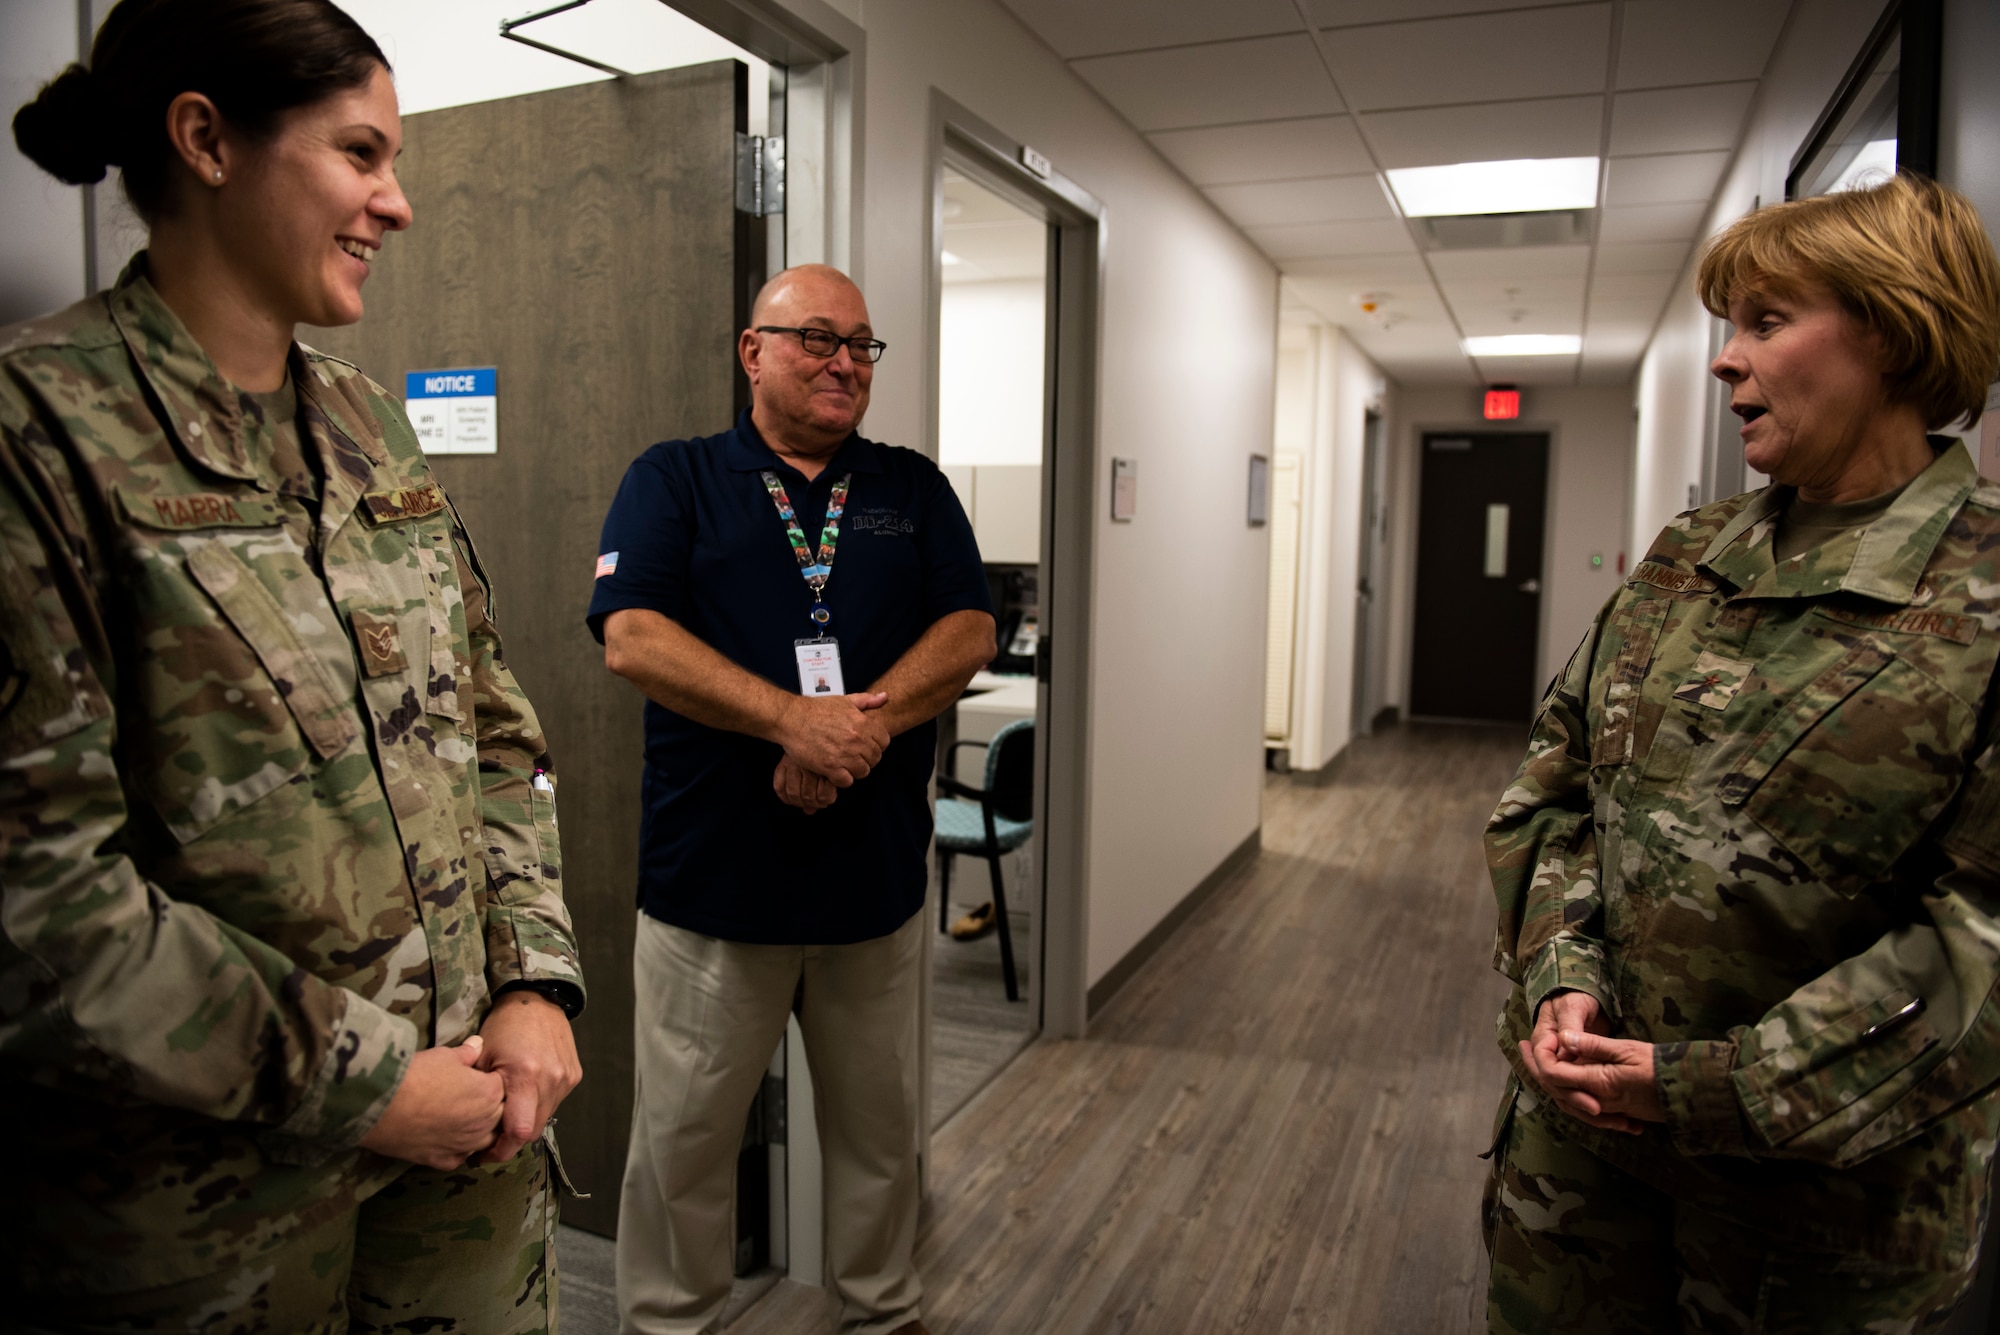 U.S. Air Force Staff Sgt. Ashlyn Marra, left, and Dr. Brant Casford, 325th Medical Support Squadron radiology technician, brief new improvements to U.S. Air Force Brig. Gen. Sharon Bannister, Air Combat Command Surgeon General, at Tyndall Air Force Base, Florida, Dec. 18, 2019. The 325th Medical Group's radiology unit has recently expanded their equipment inventory and added an entire section specifically for women's care to include ultrasound and mammogram technology. (U.S. Air Force photo by Staff Sgt. Magen M. Reeves)